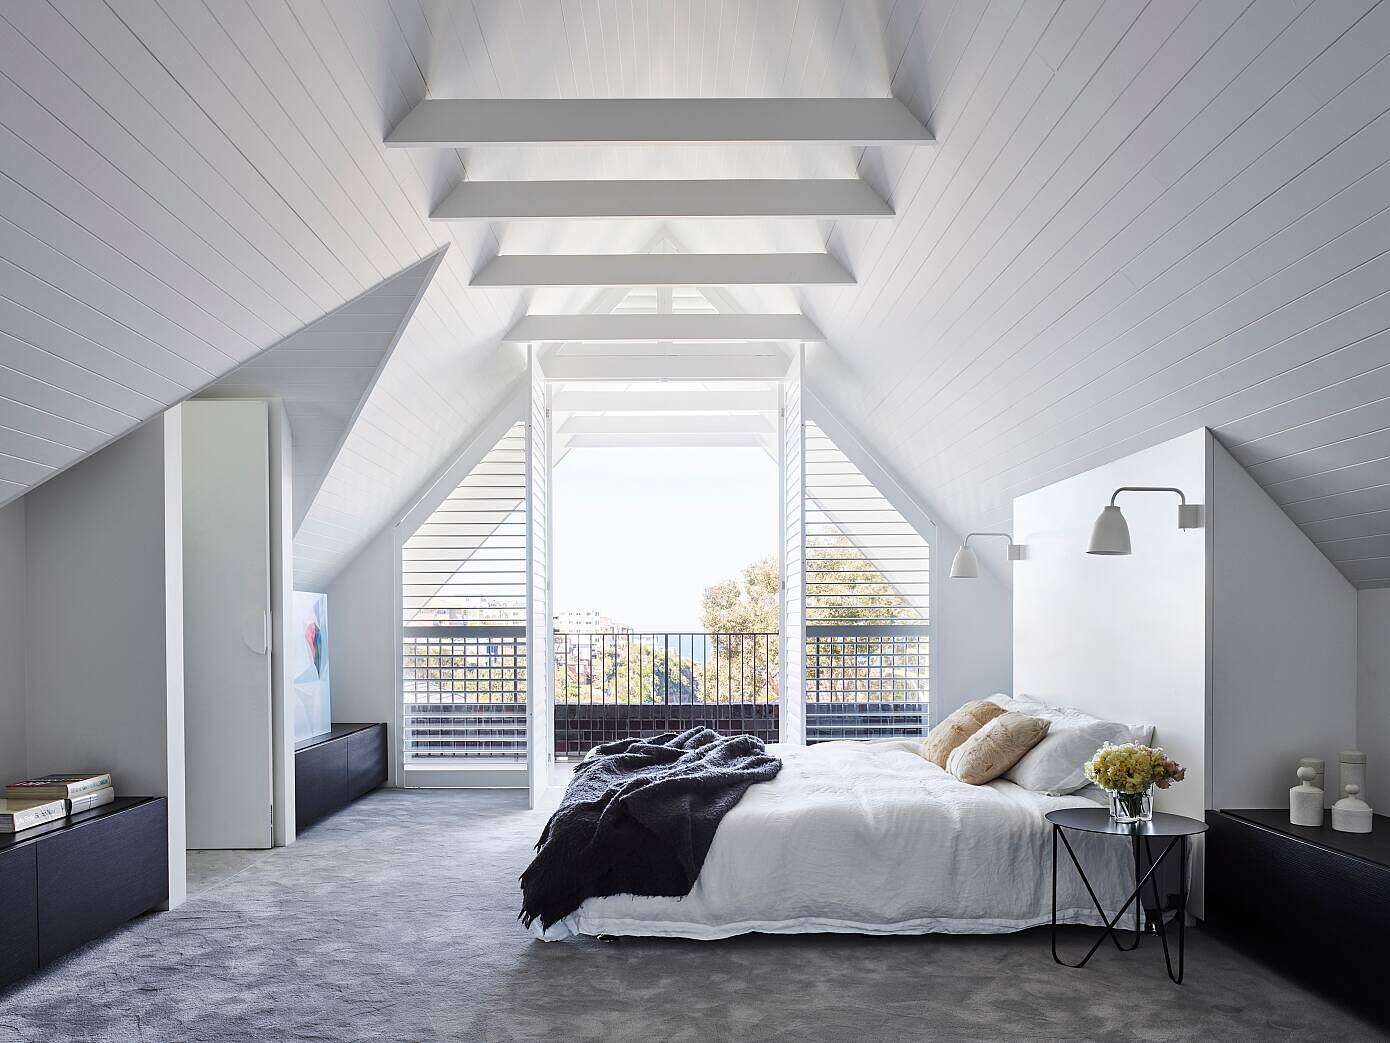 Attic House by Madeleine Blanchfield Architects